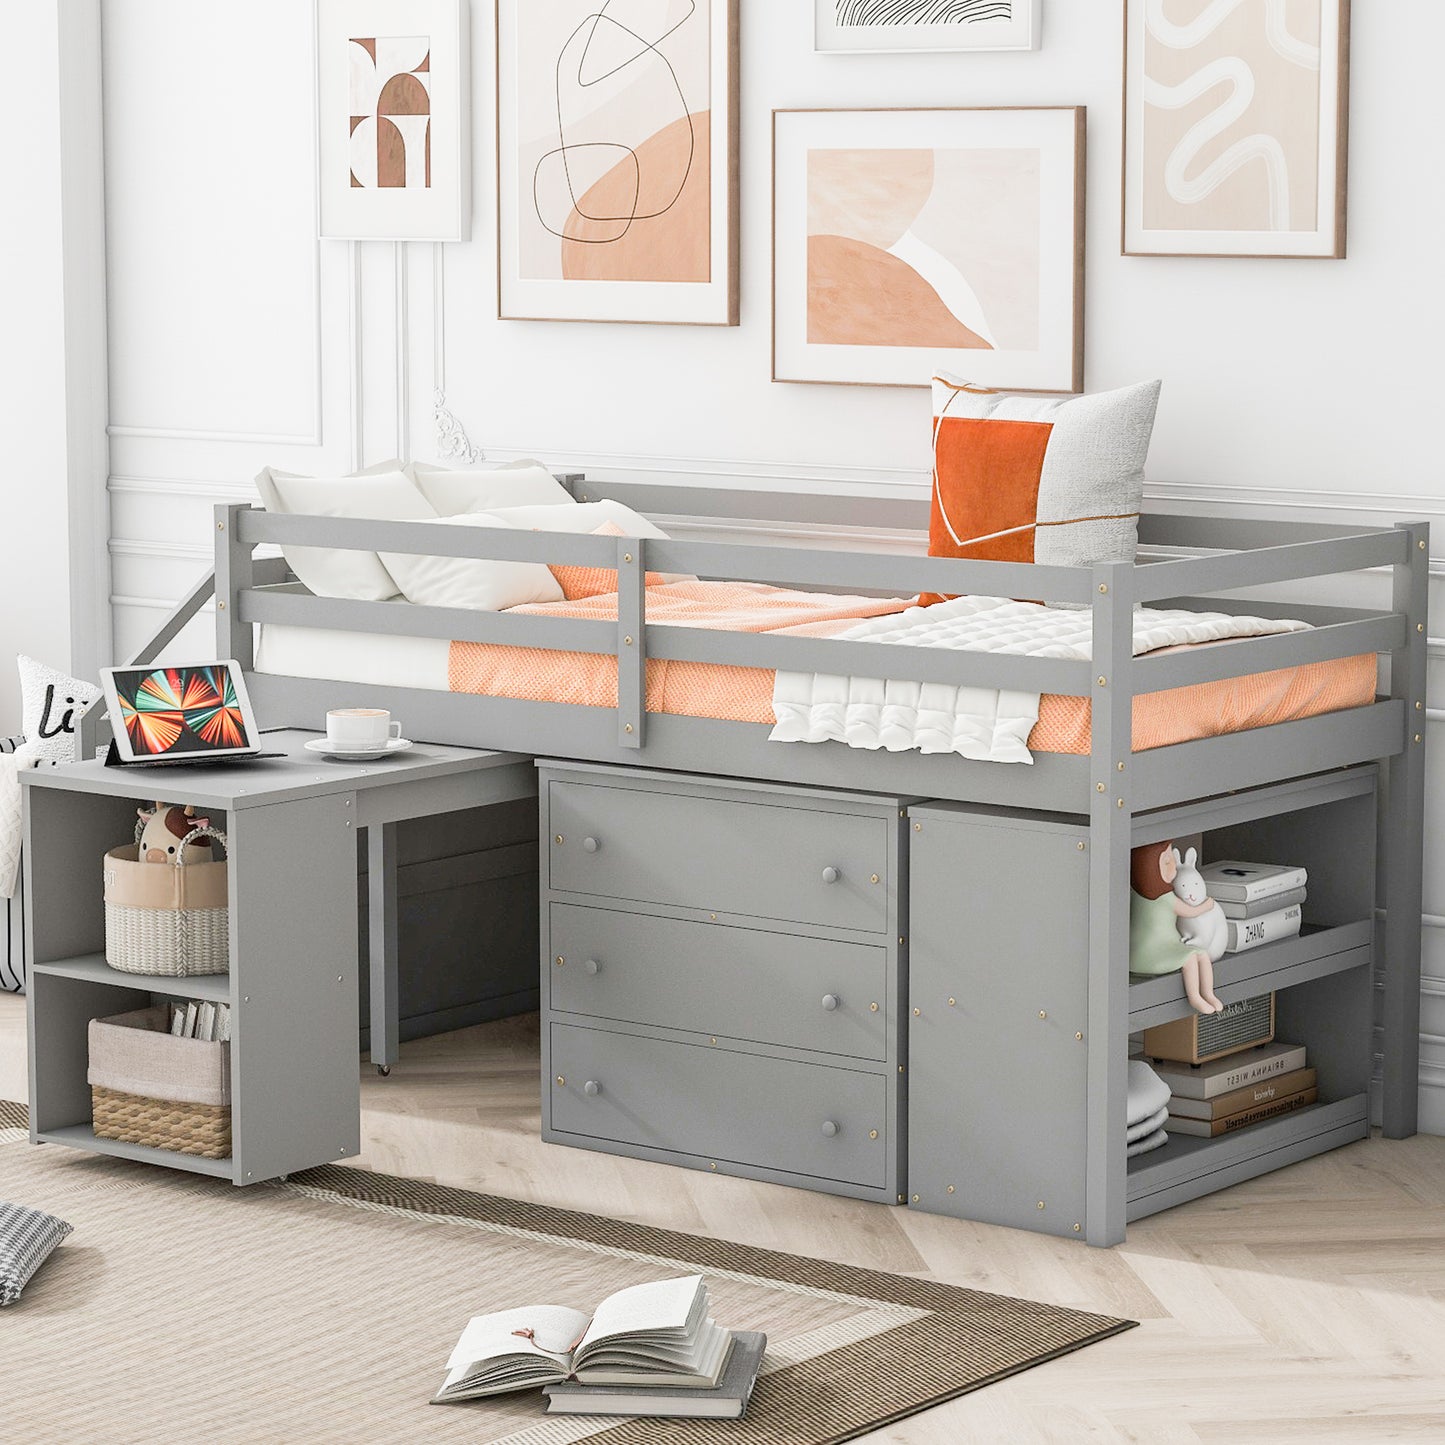 Twin Size Loft Bed with Retractable Writing Desk and 3 Drawers, Wooden Loft Bed with Storage Stairs and Shelves, Gray